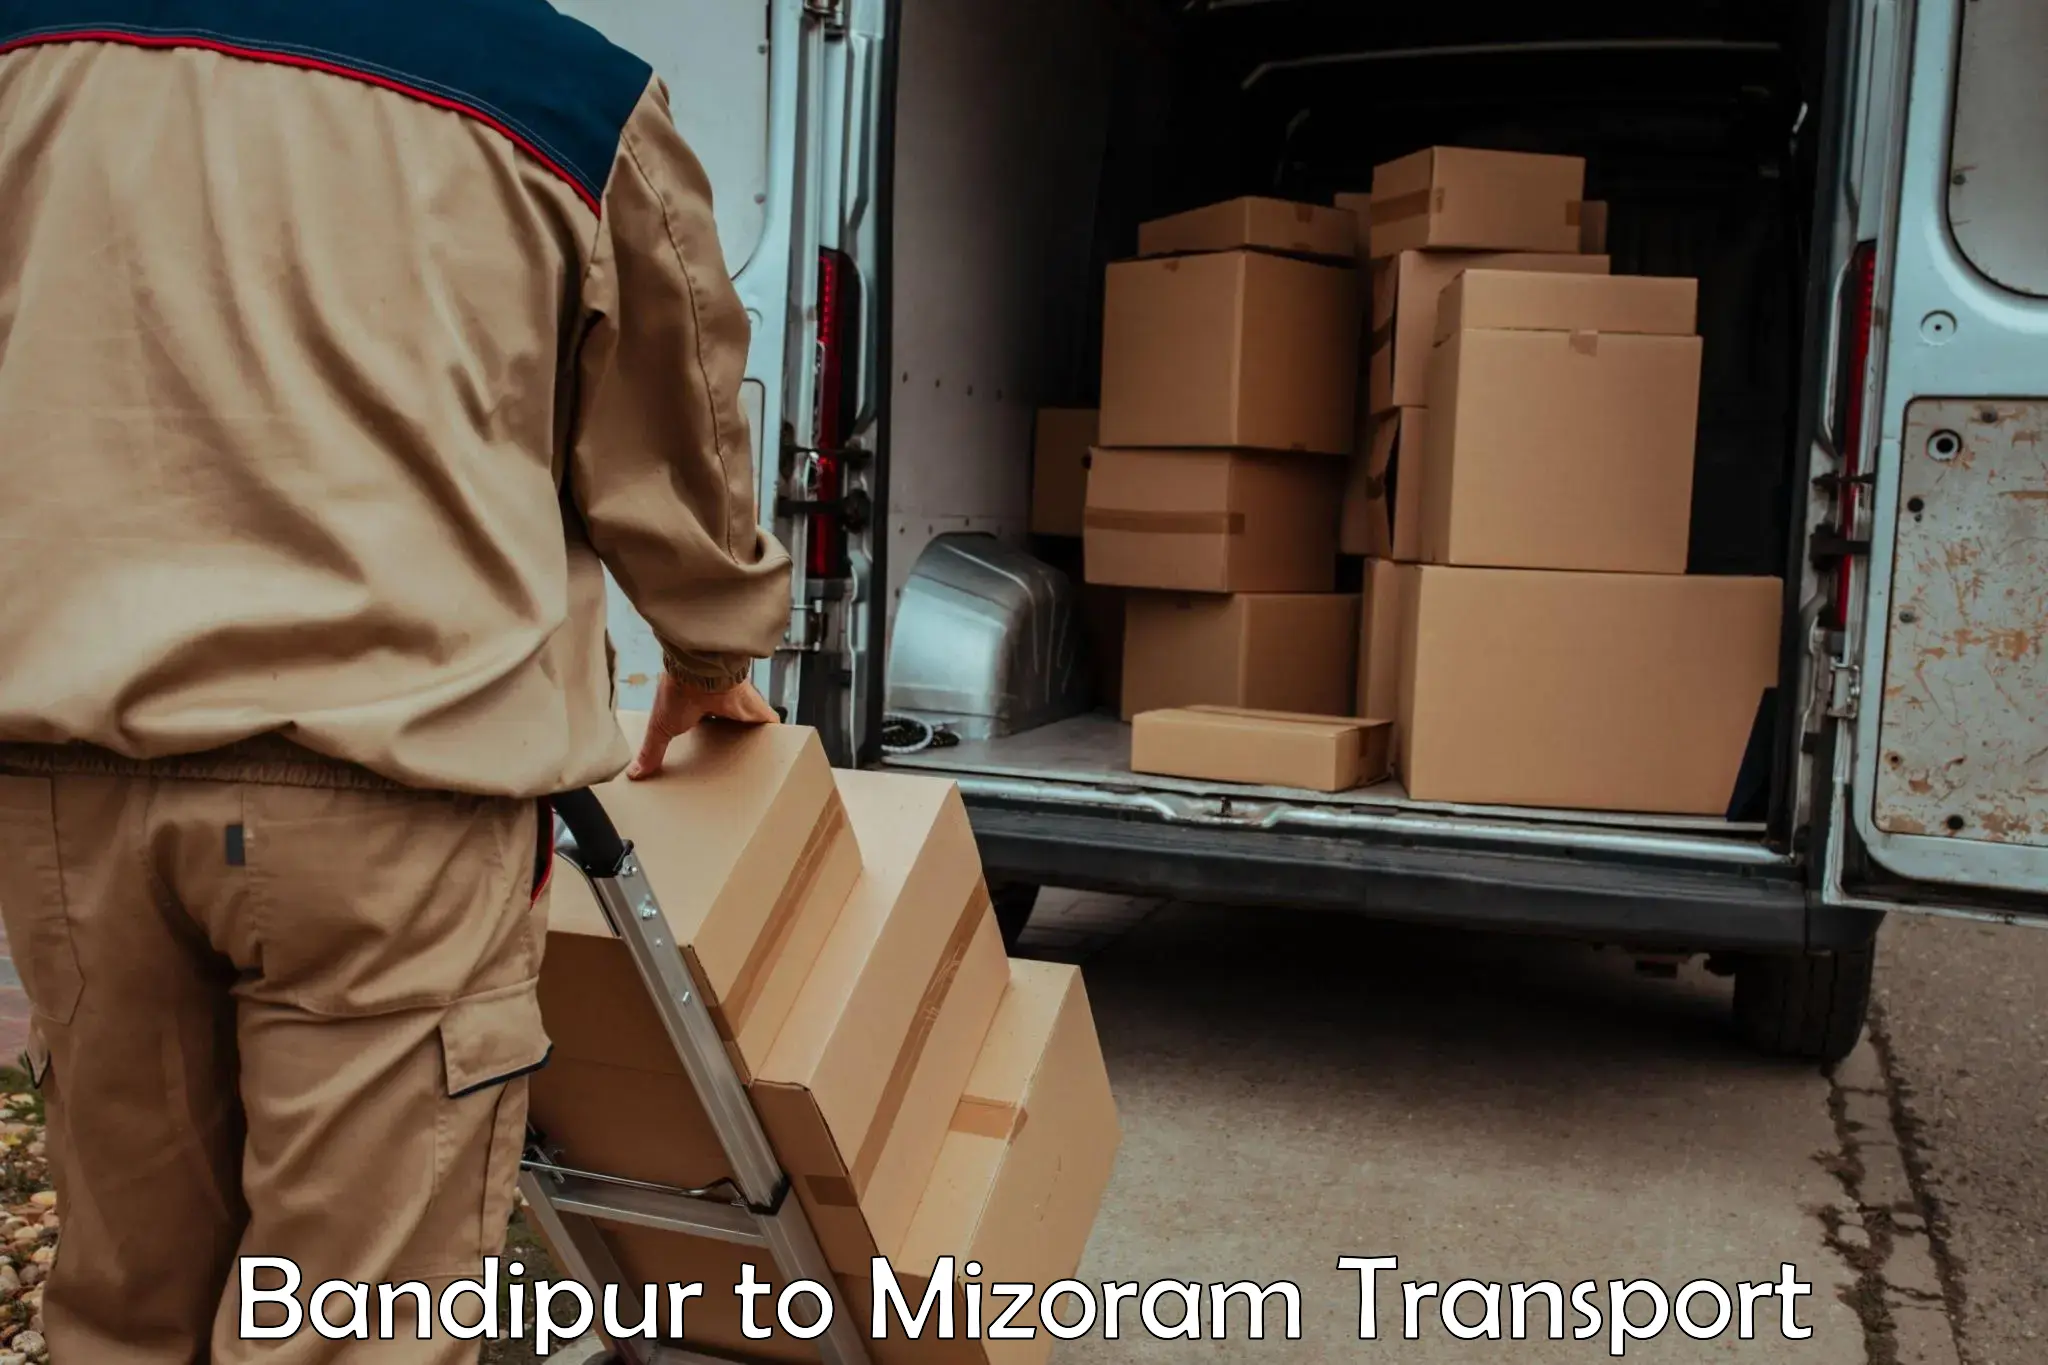 Transport bike from one state to another Bandipur to Mizoram